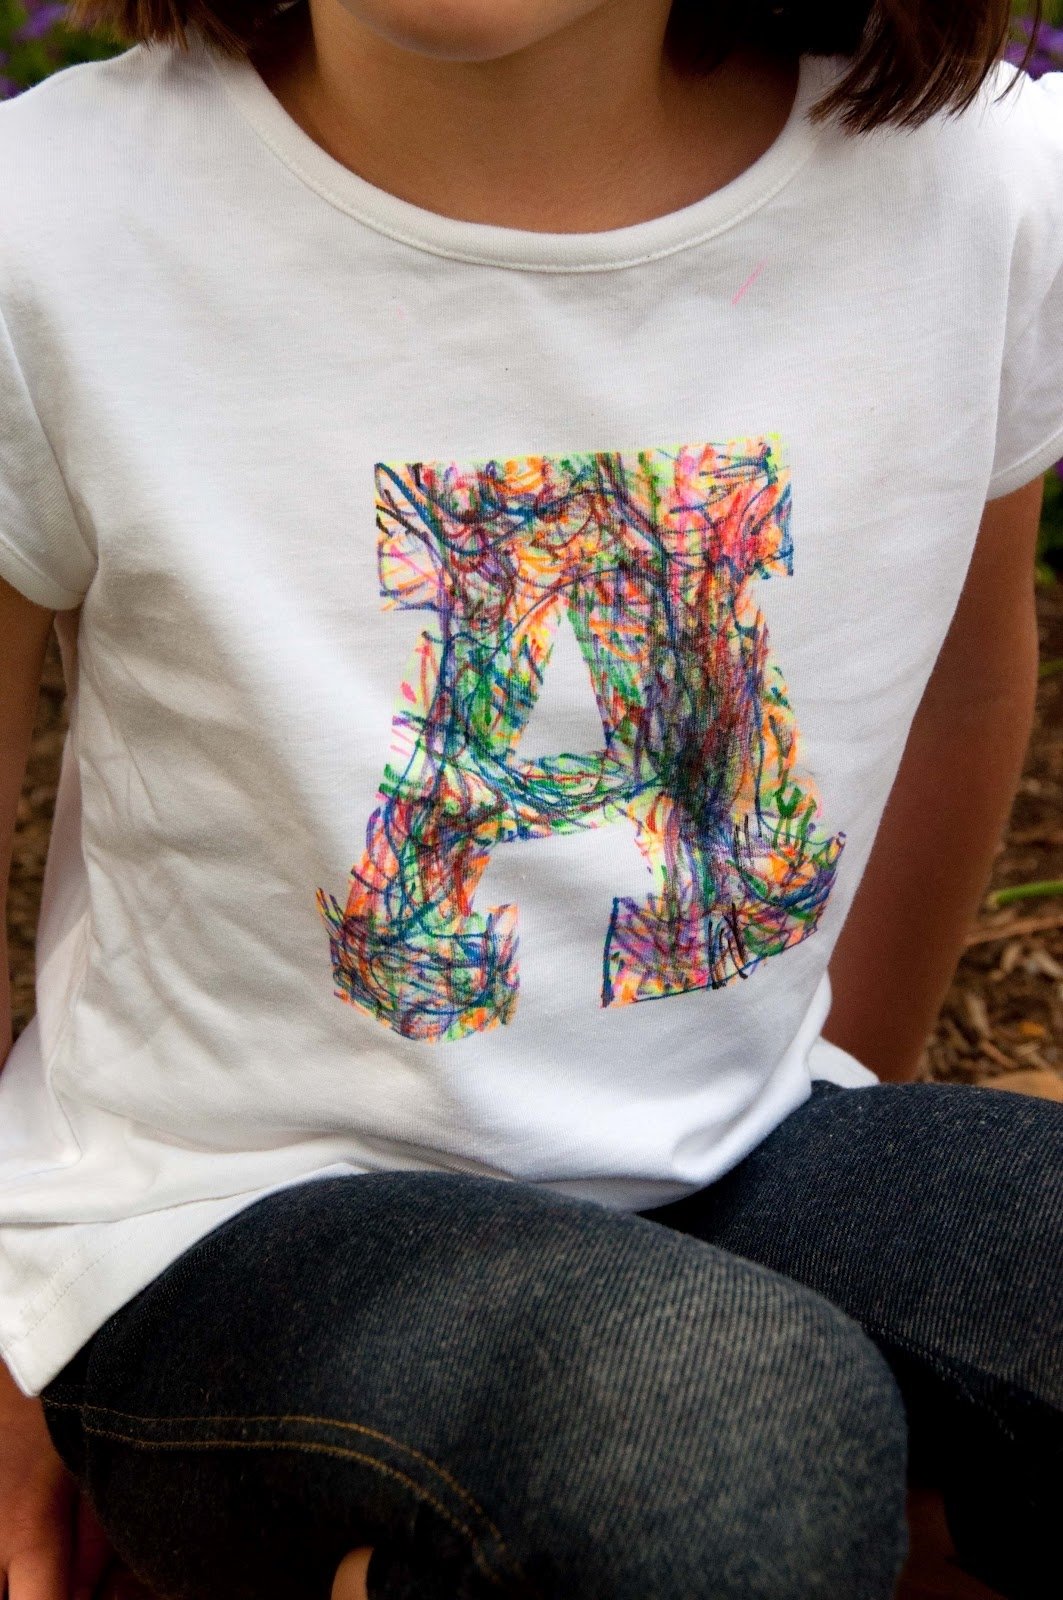 10 Stylish Puffy Paint T Shirt Ideas freezer paper stencils use sharpies or fabric markers to scribble 2022